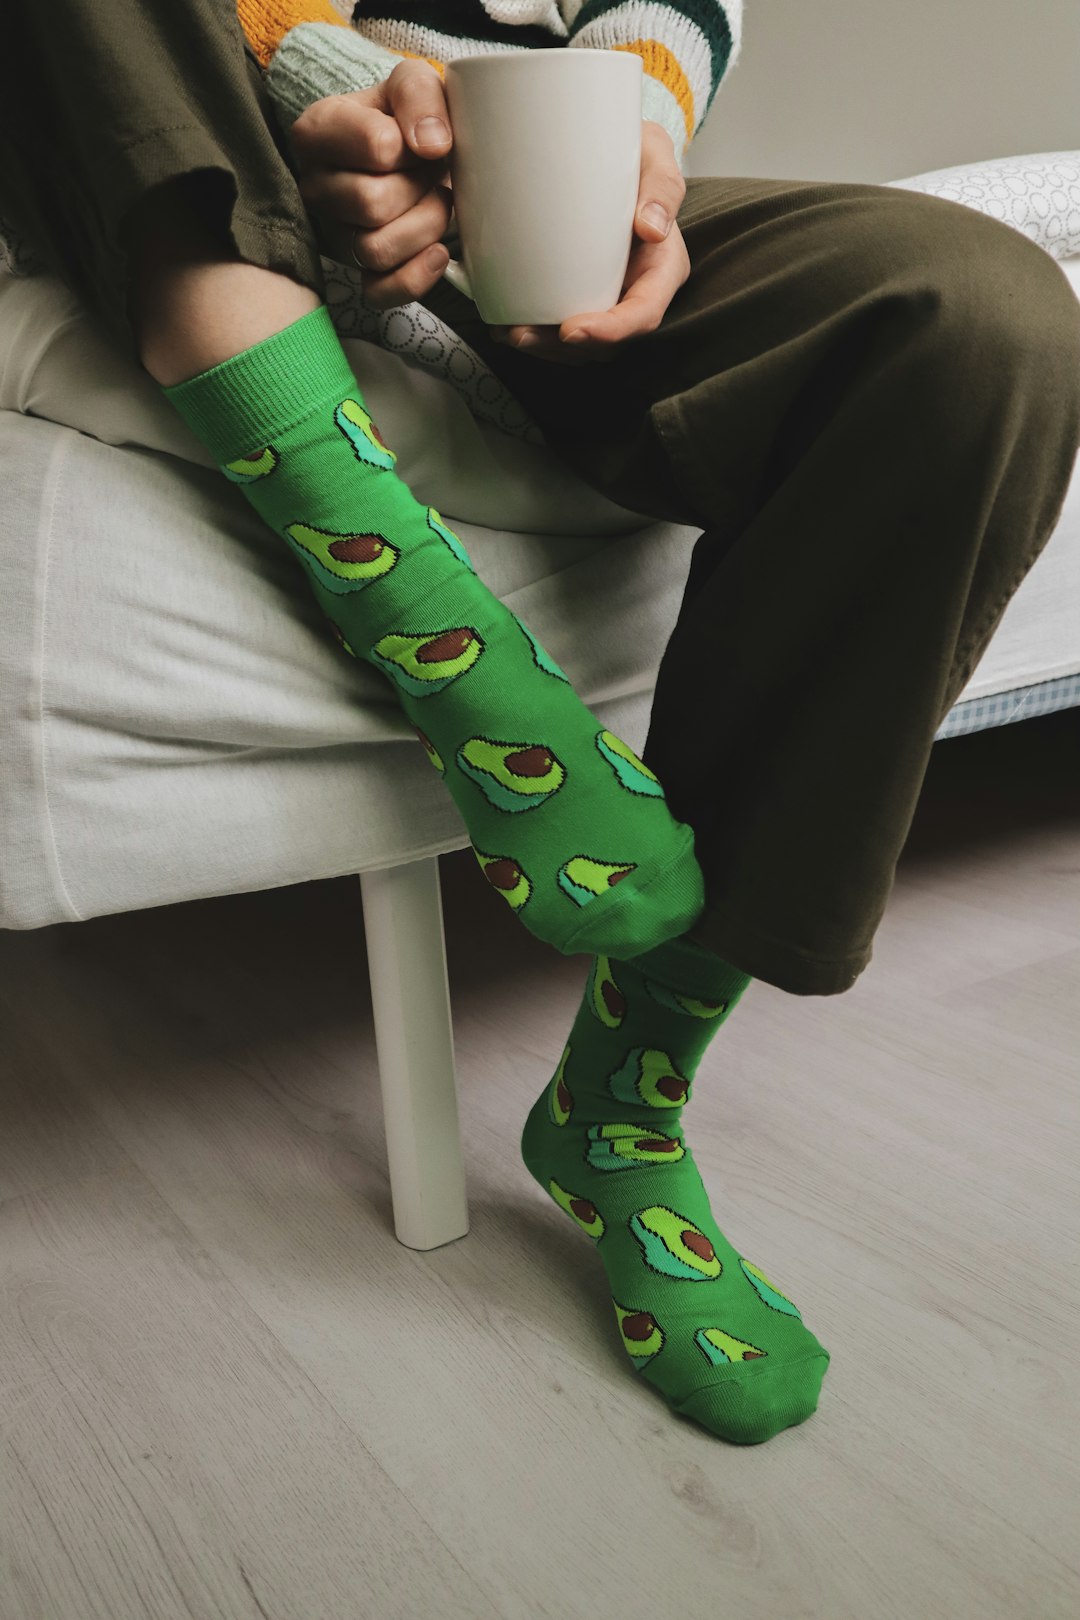 person wearing pair of green-and-red foot sock